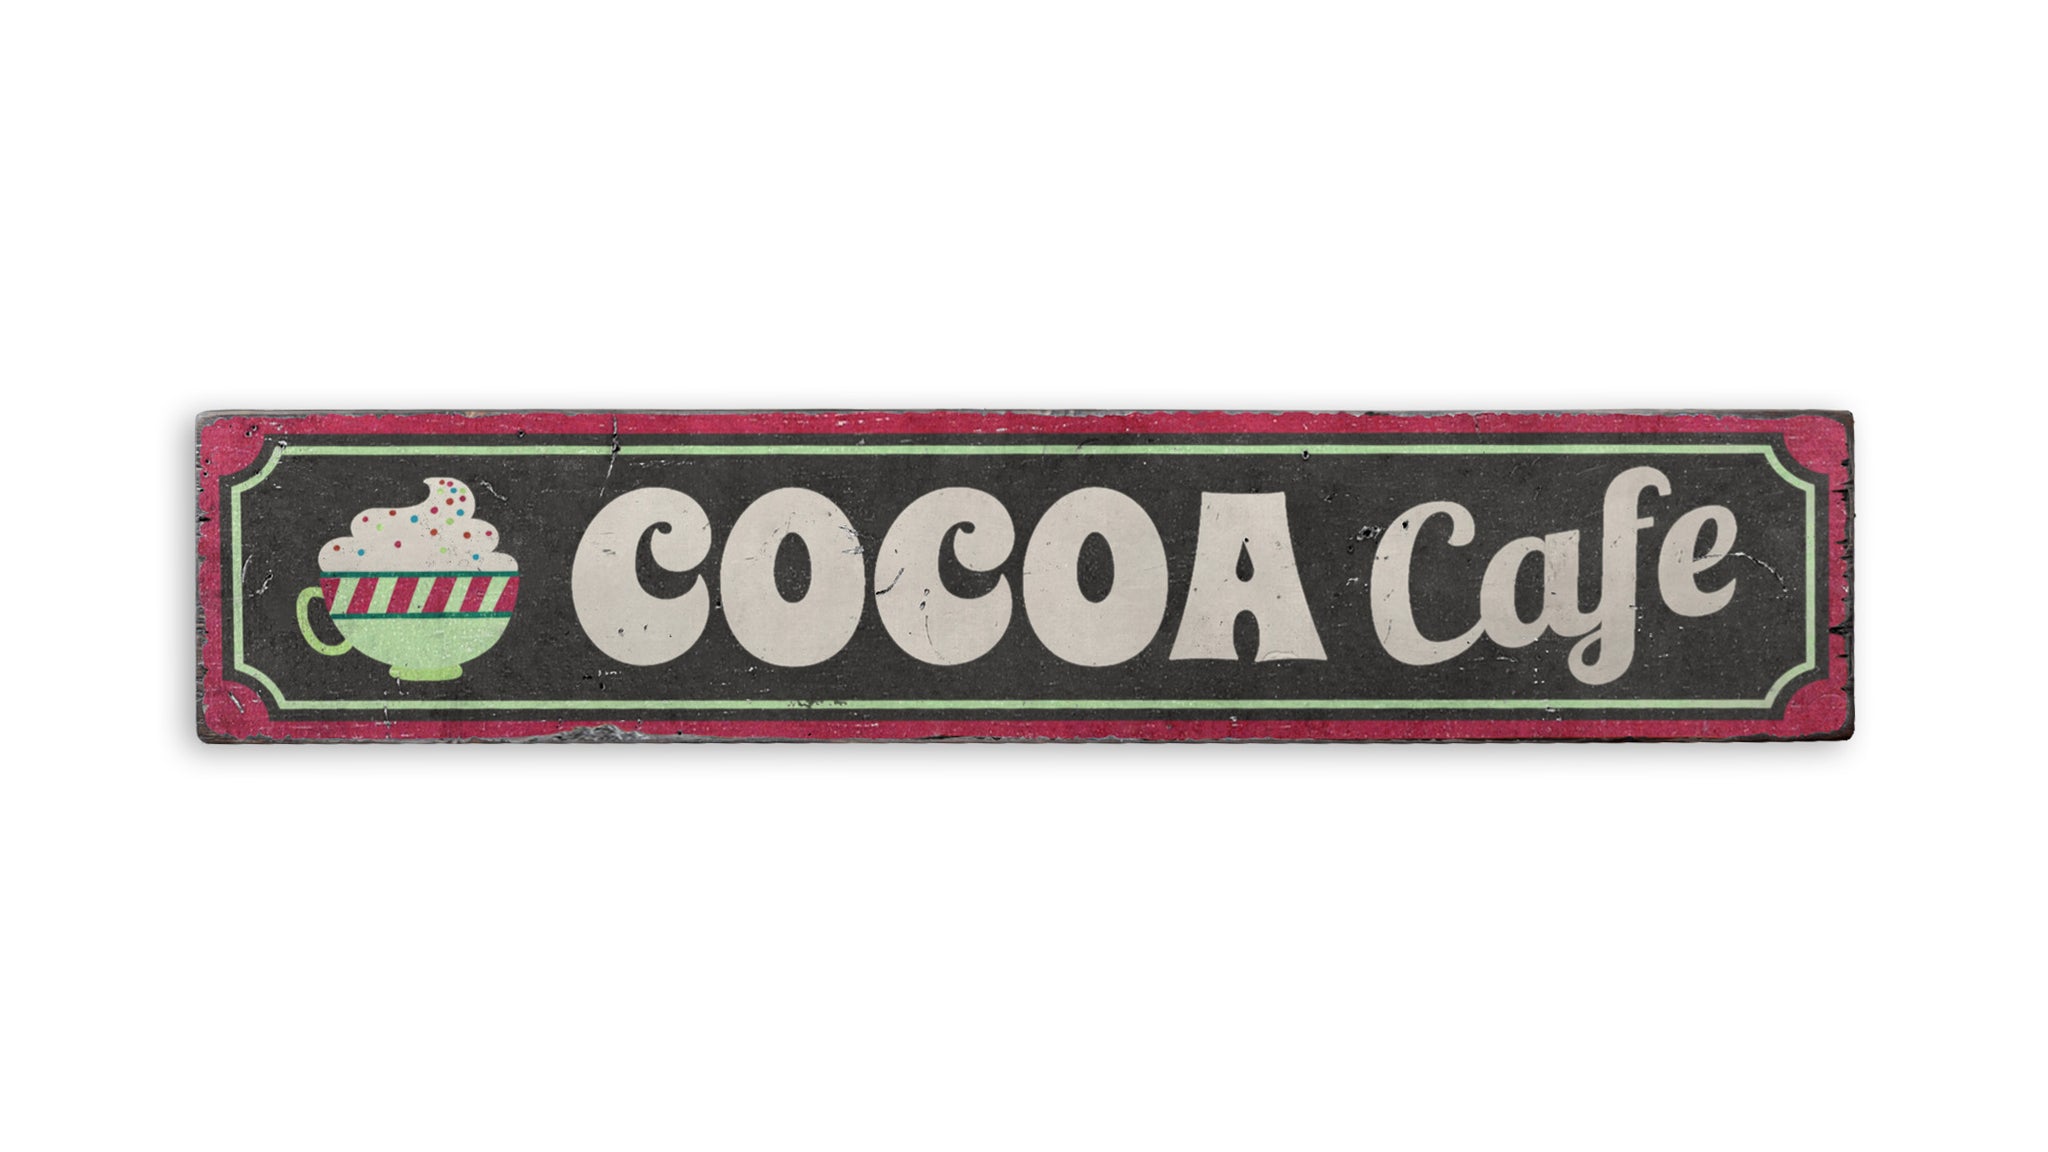 Hot Cocoa Cafe Yuletide Rustic Wood Sign